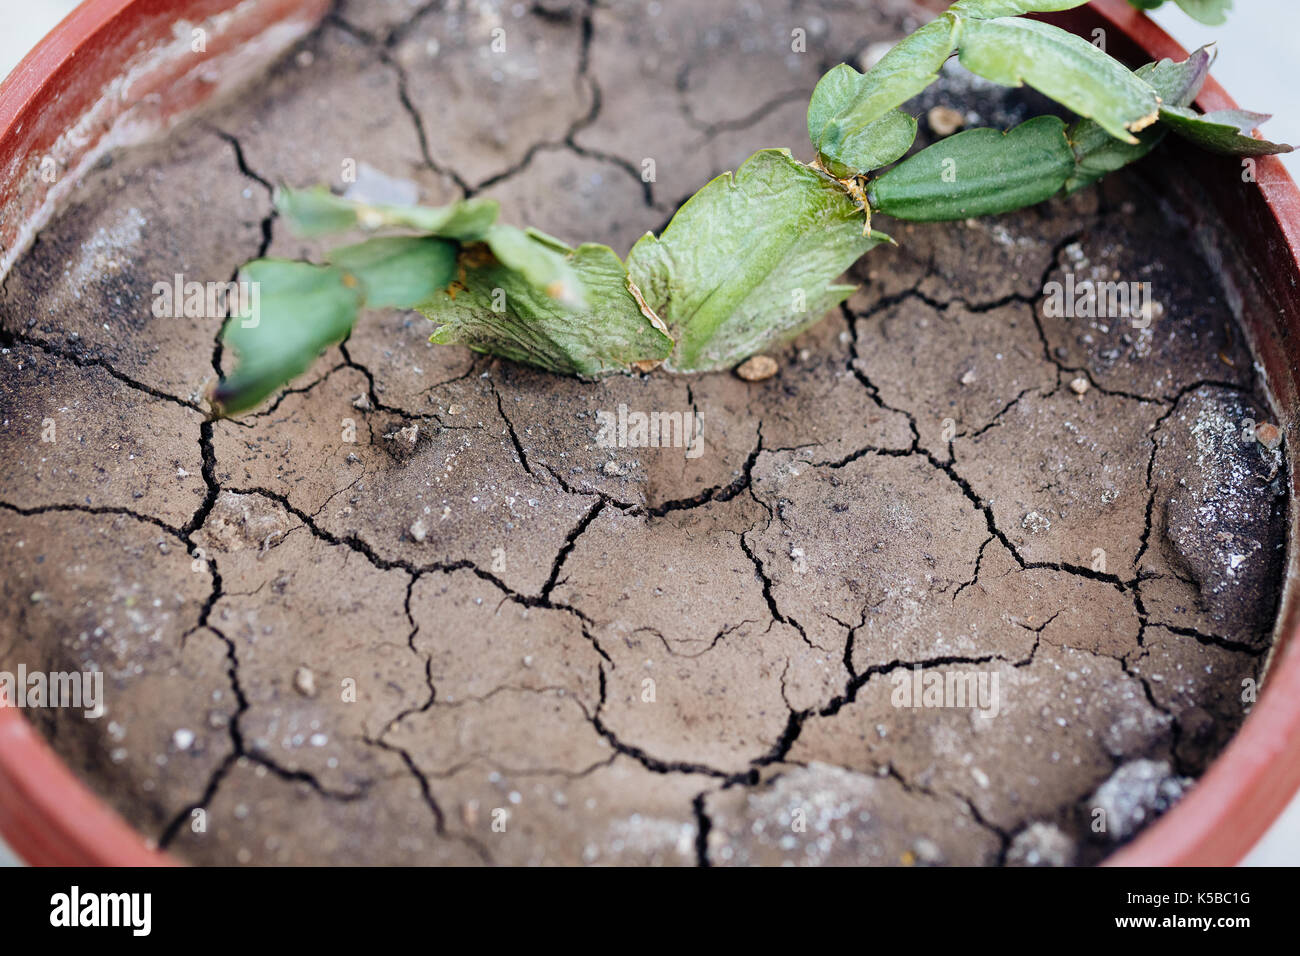 Dry earth in a flowerpot Stock Photo